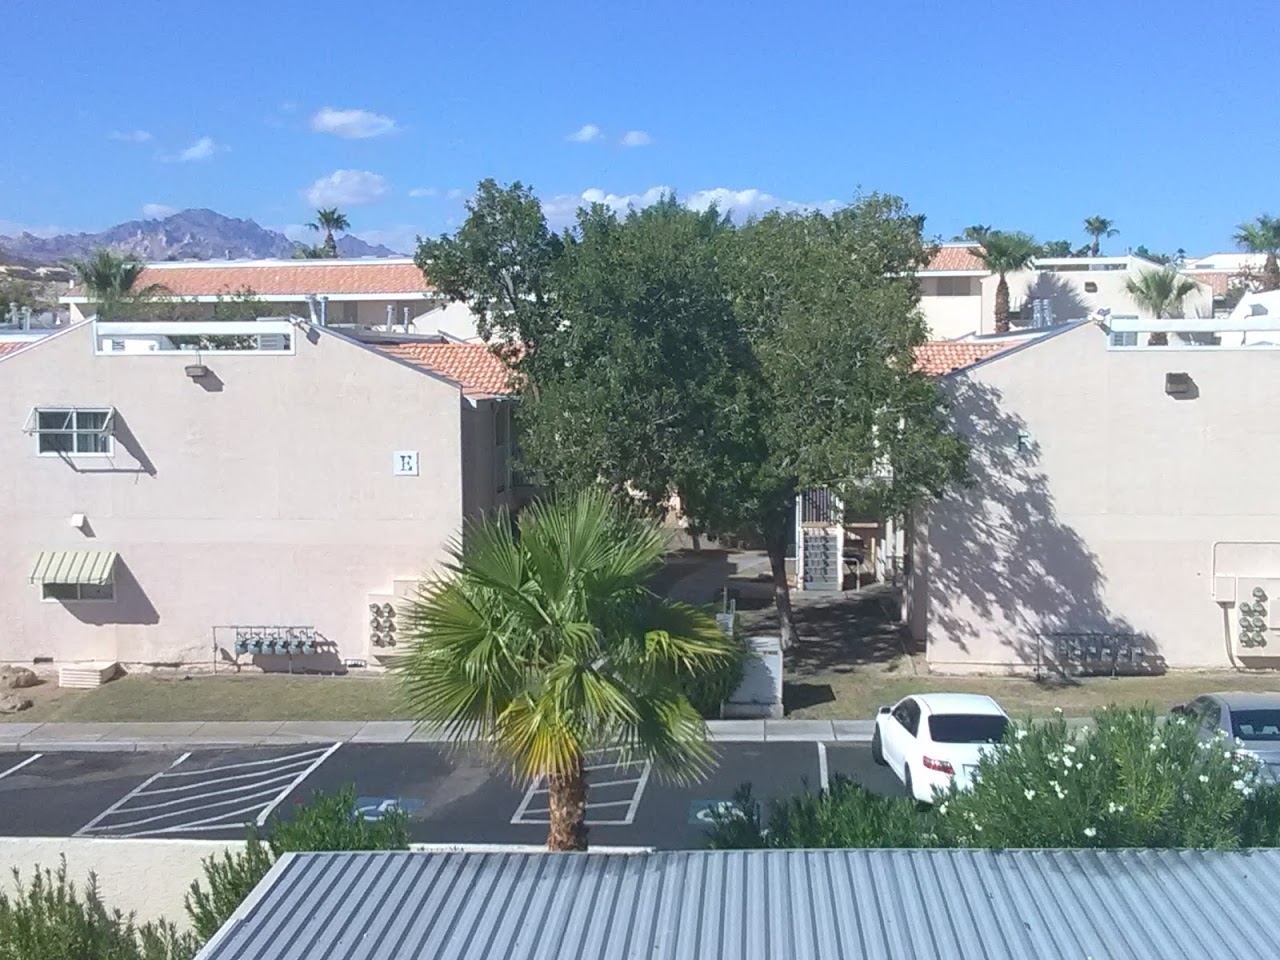 Photo of RIVERWOOD II APARTMENTS. Affordable housing located at 1701 CAL EDISON DRIVE LAUGHLIN, NV 89029